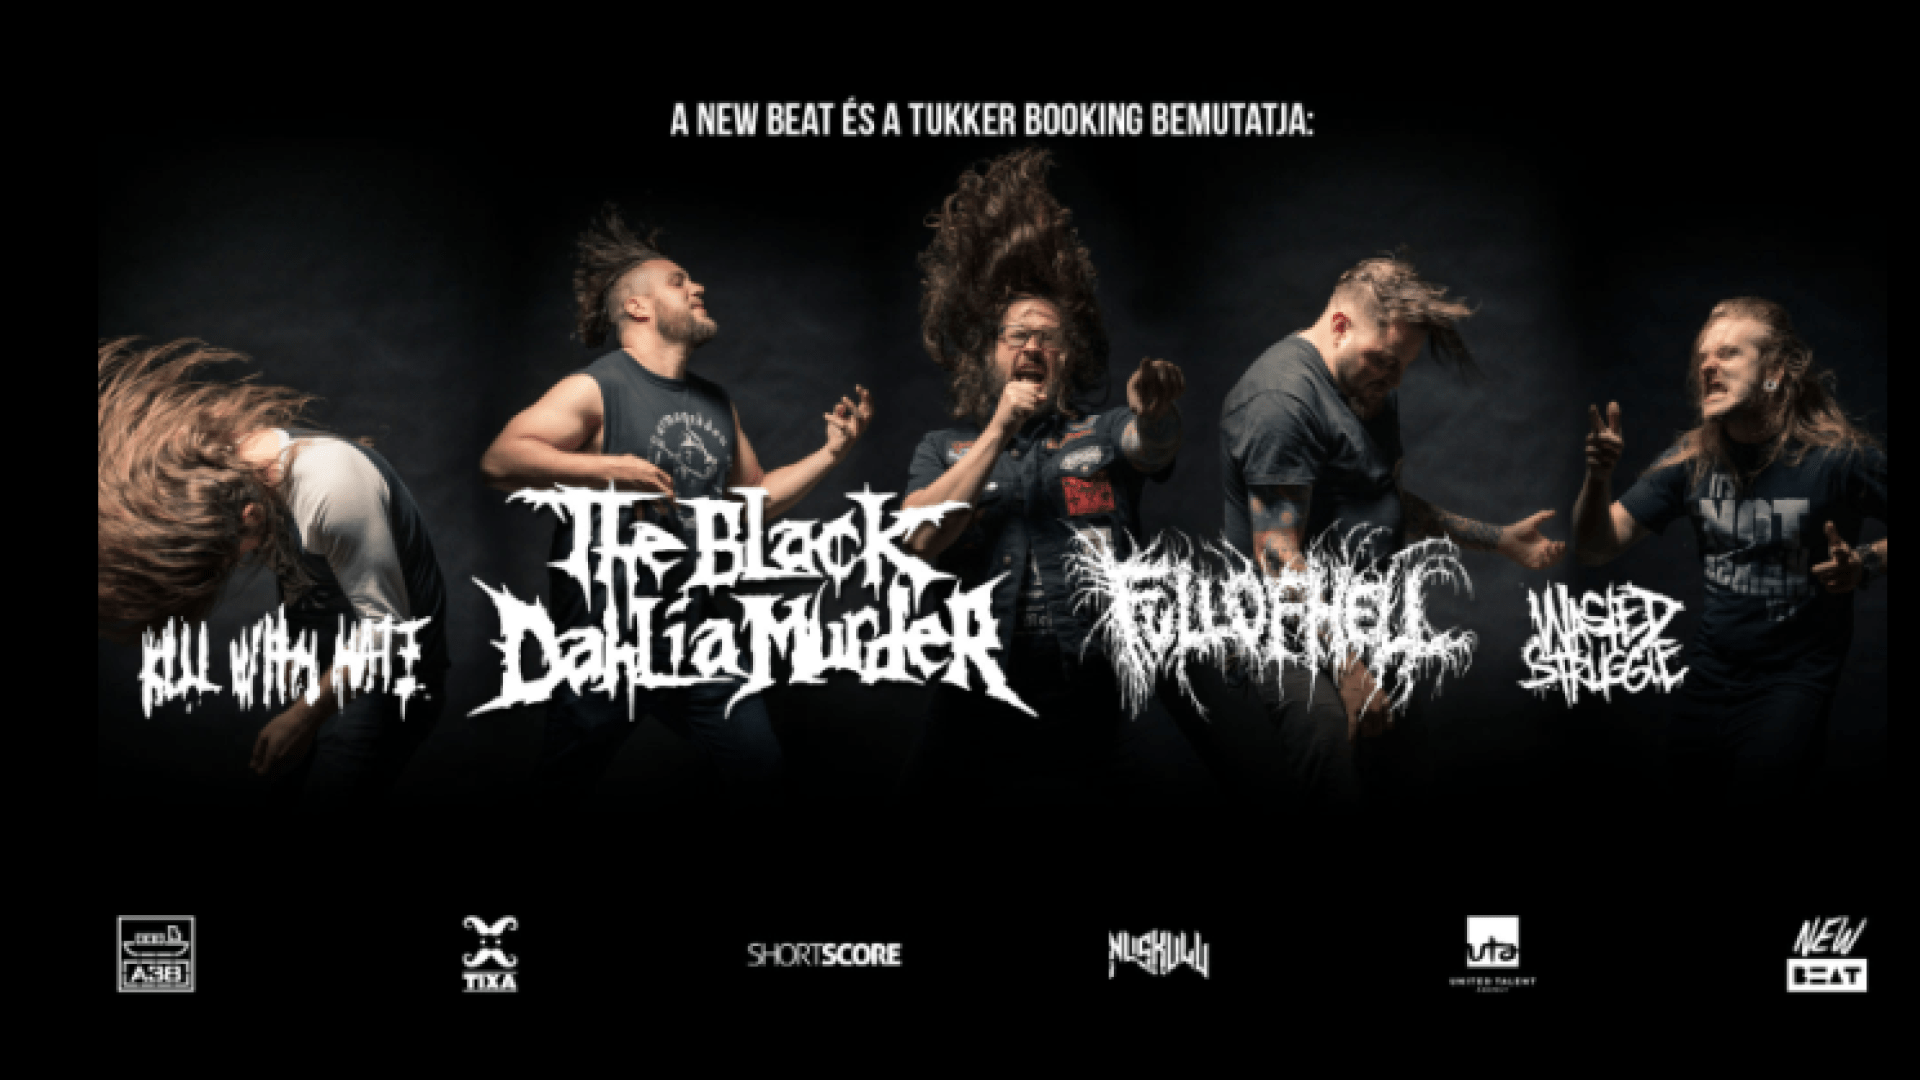 The Black Dahlia Murder, Full of Hell, KWH, WS